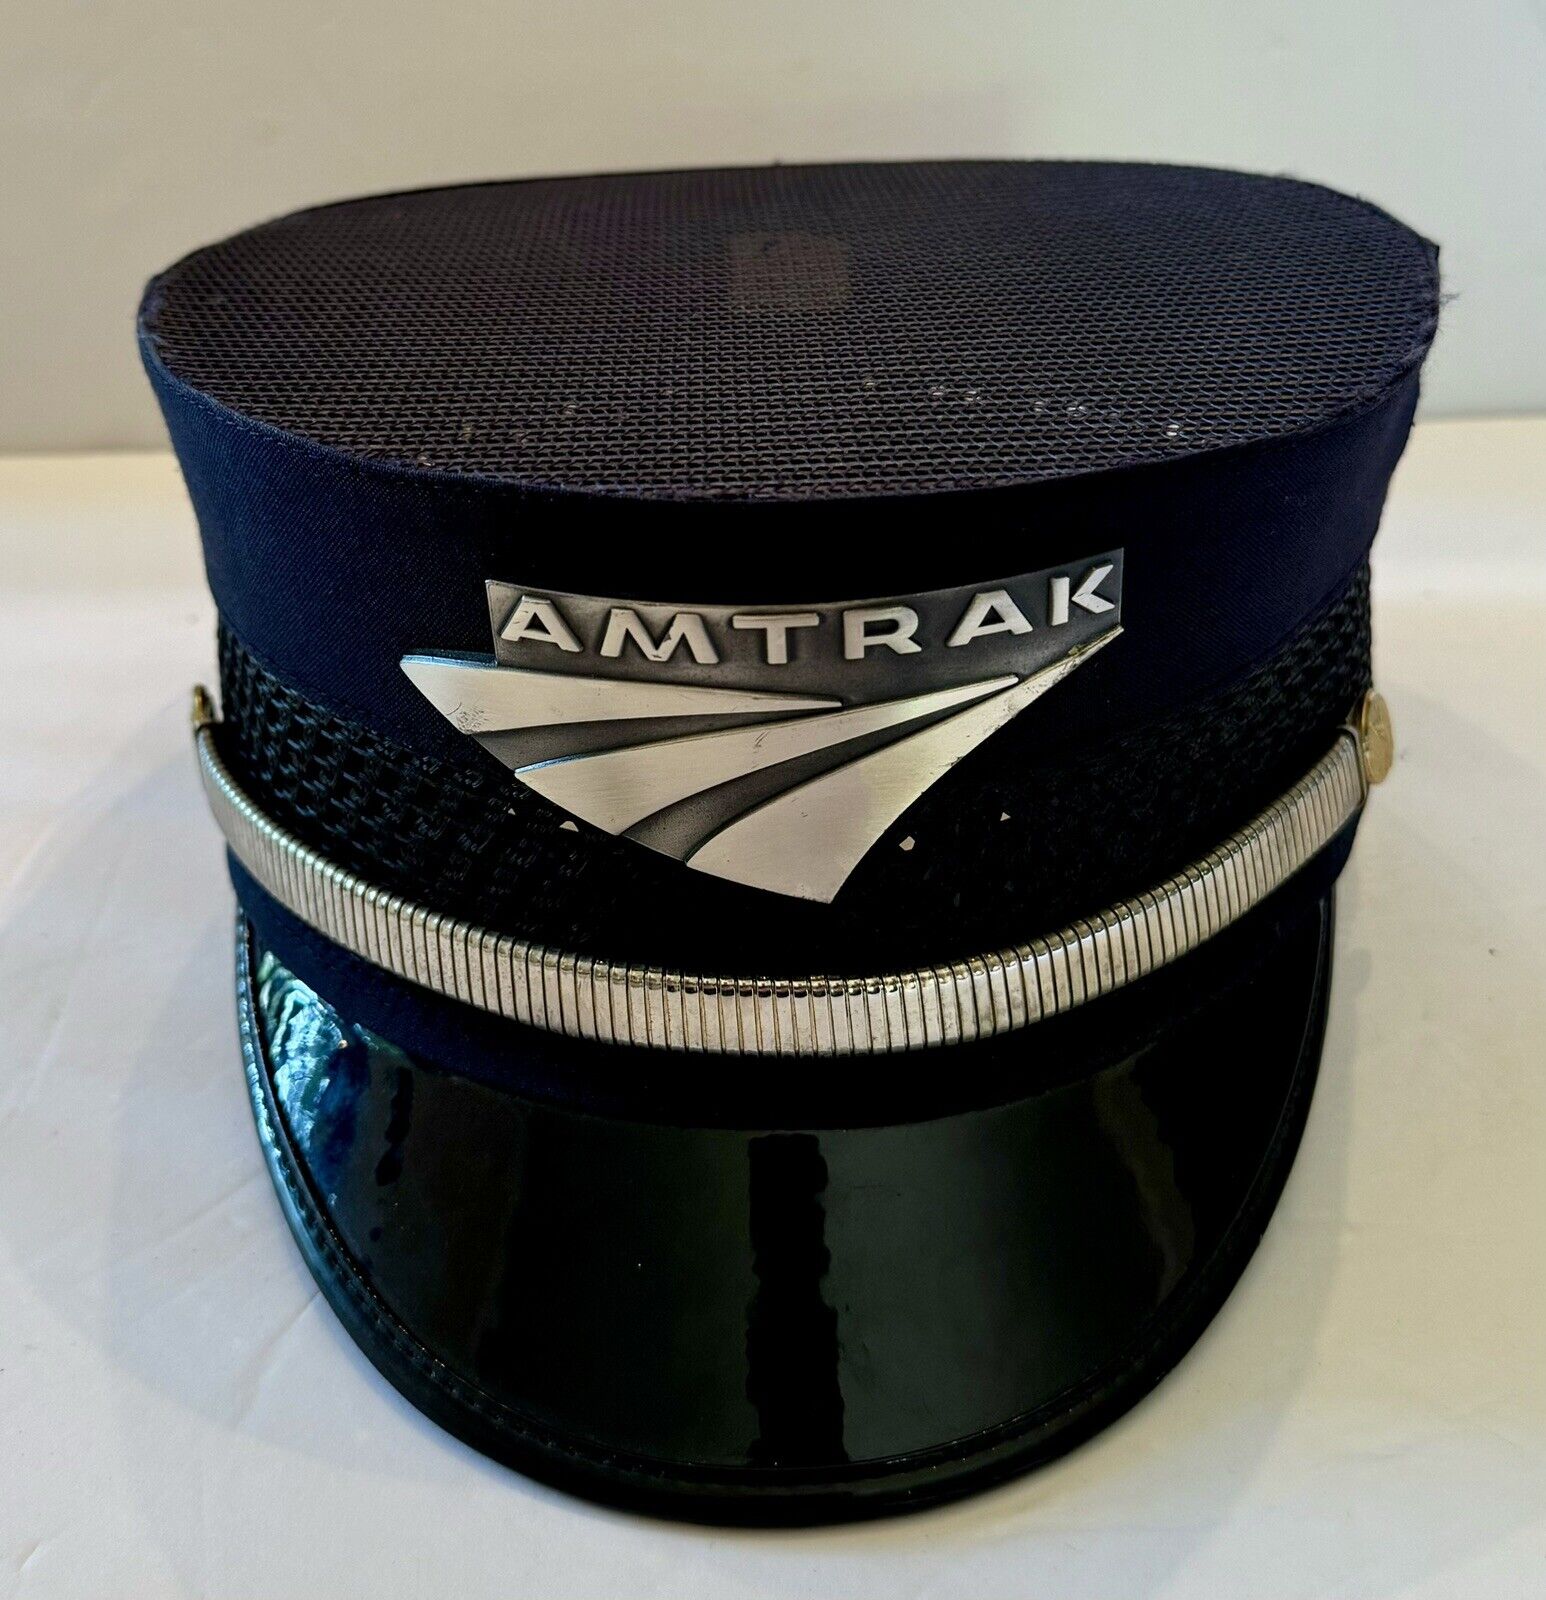 AMTRAK CONDUCTOR HAT & BADGE “PILLBOX STYLE” SOLID TOP - Size 7 1/4 - 100% Wool